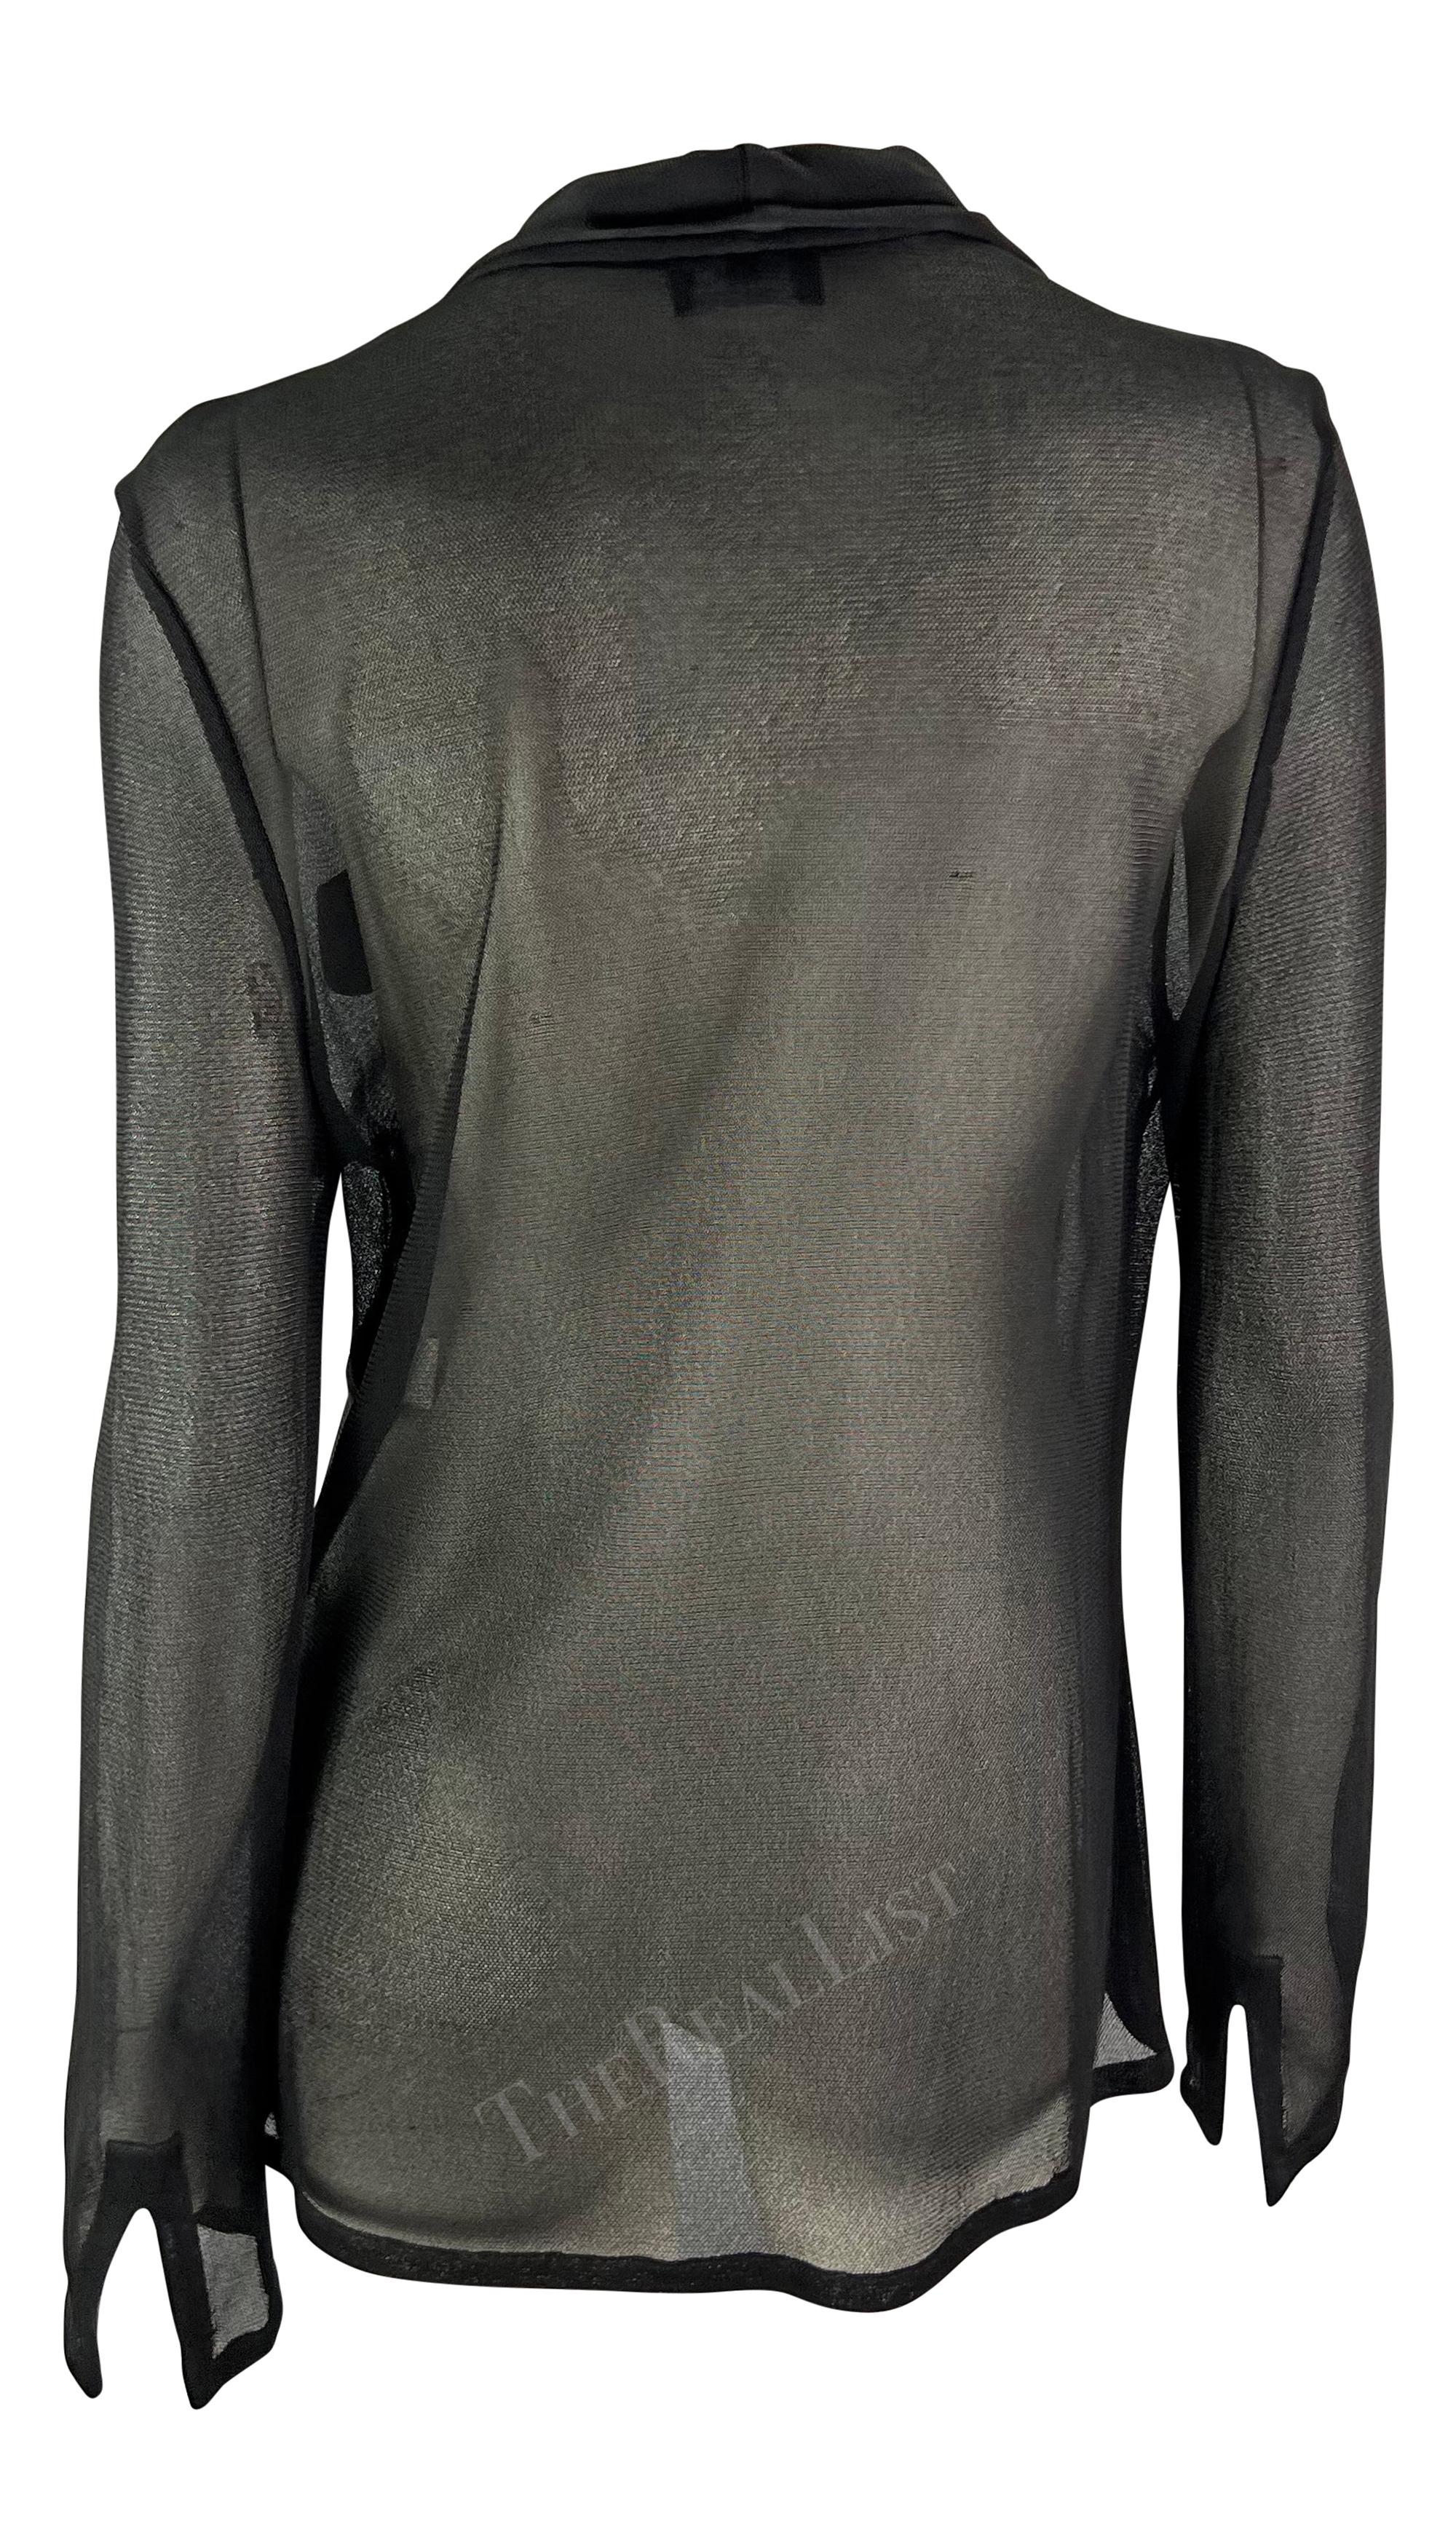 S/S 1997 Gucci by Tom Ford Sheer Black Viscose Pocket GG Clasp Top 1